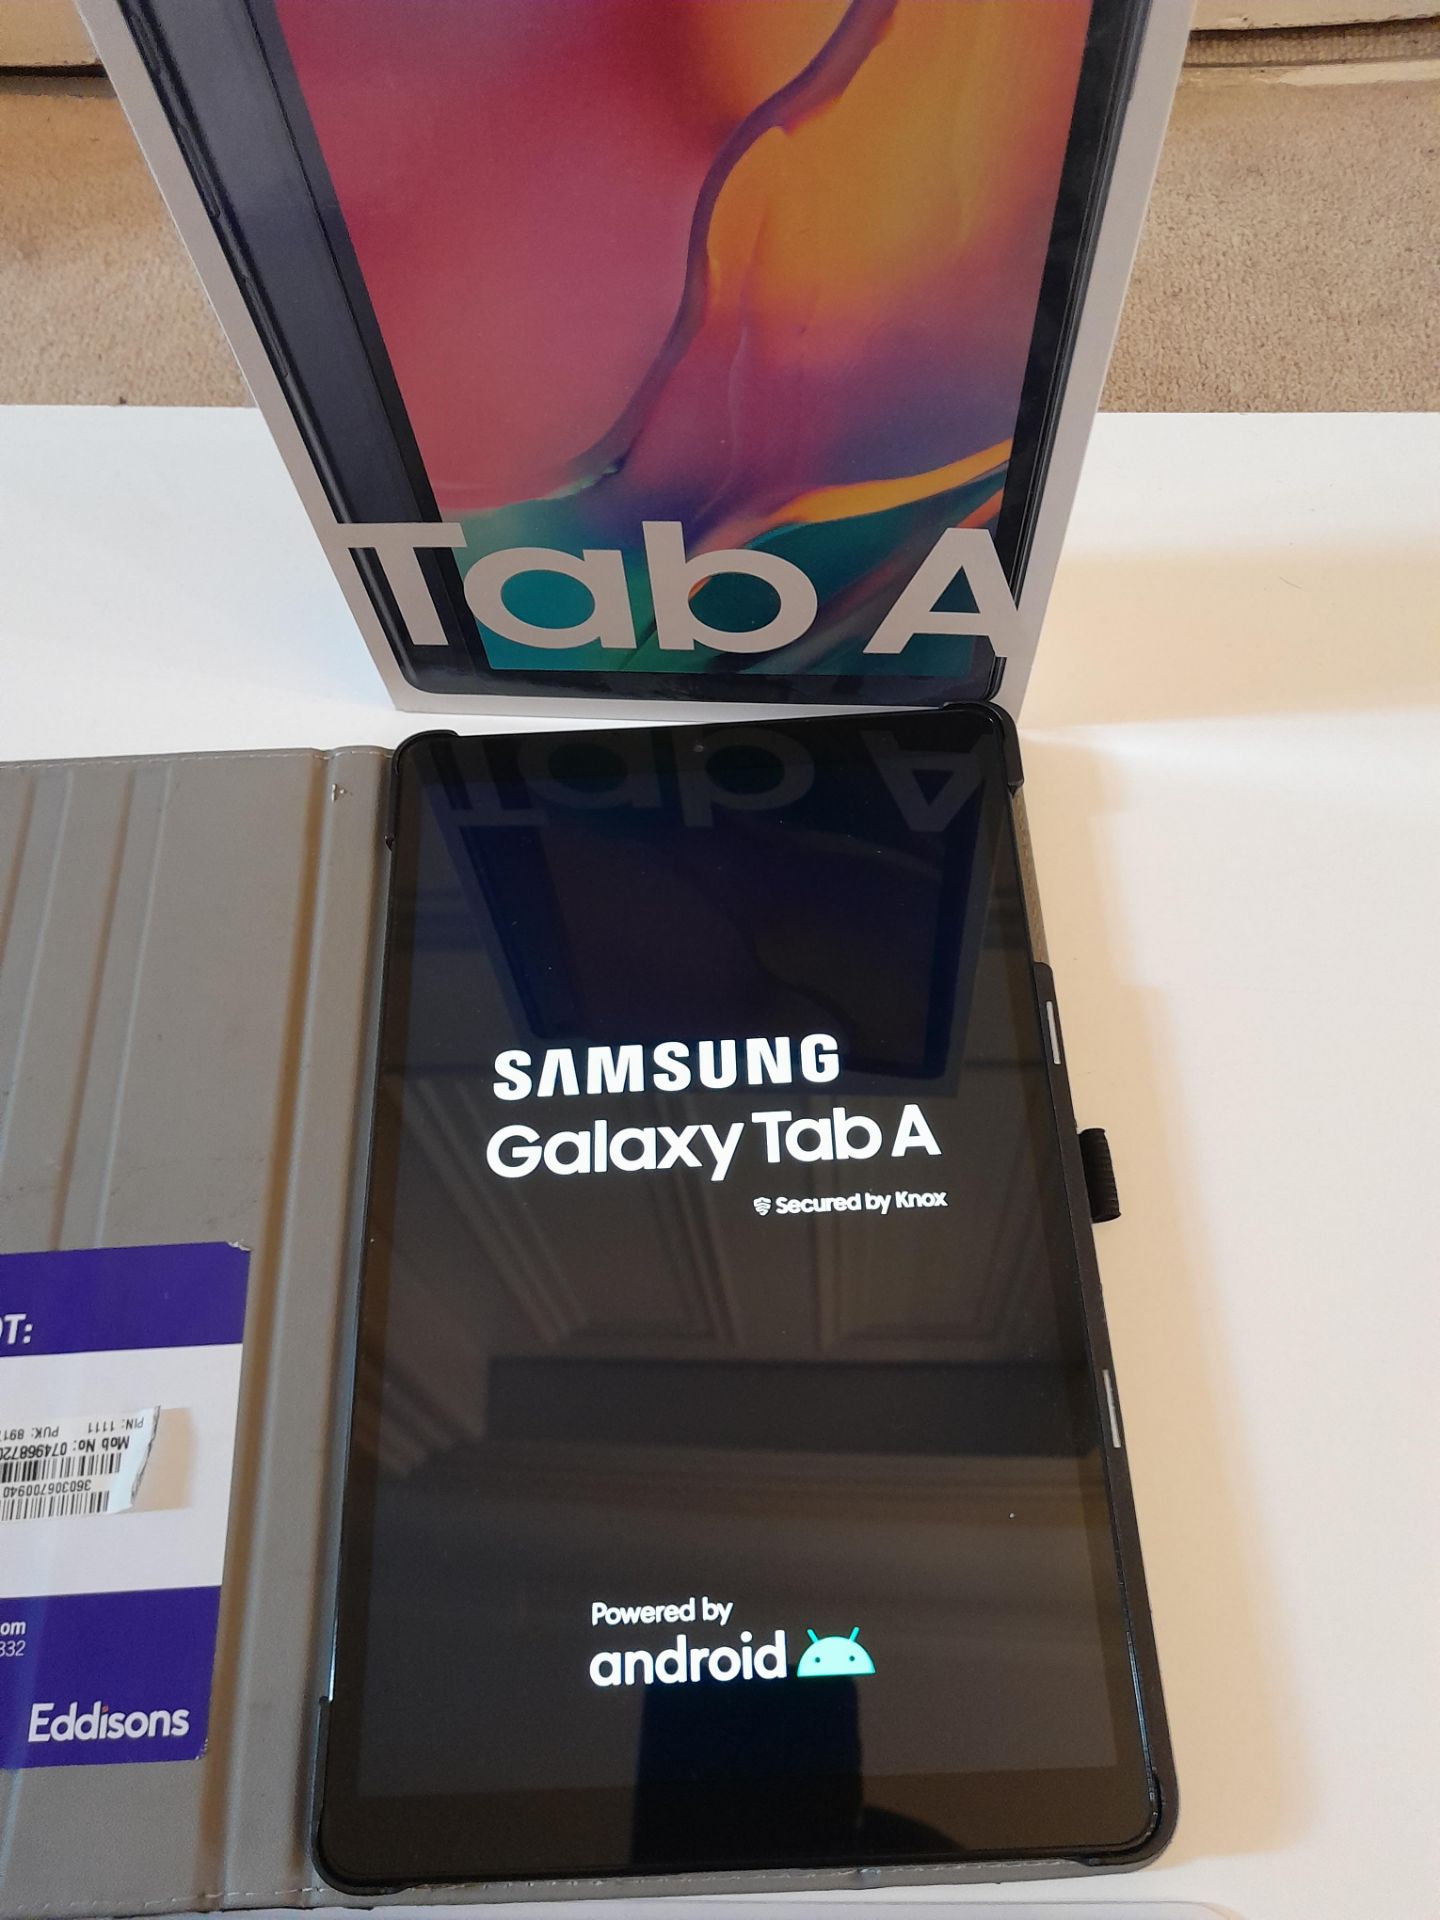 Samsung Galaxy Tab A, 32GB LTE, 64bit Octa Core Processor, 10.1in Screen, with case and box, ( - Image 3 of 5